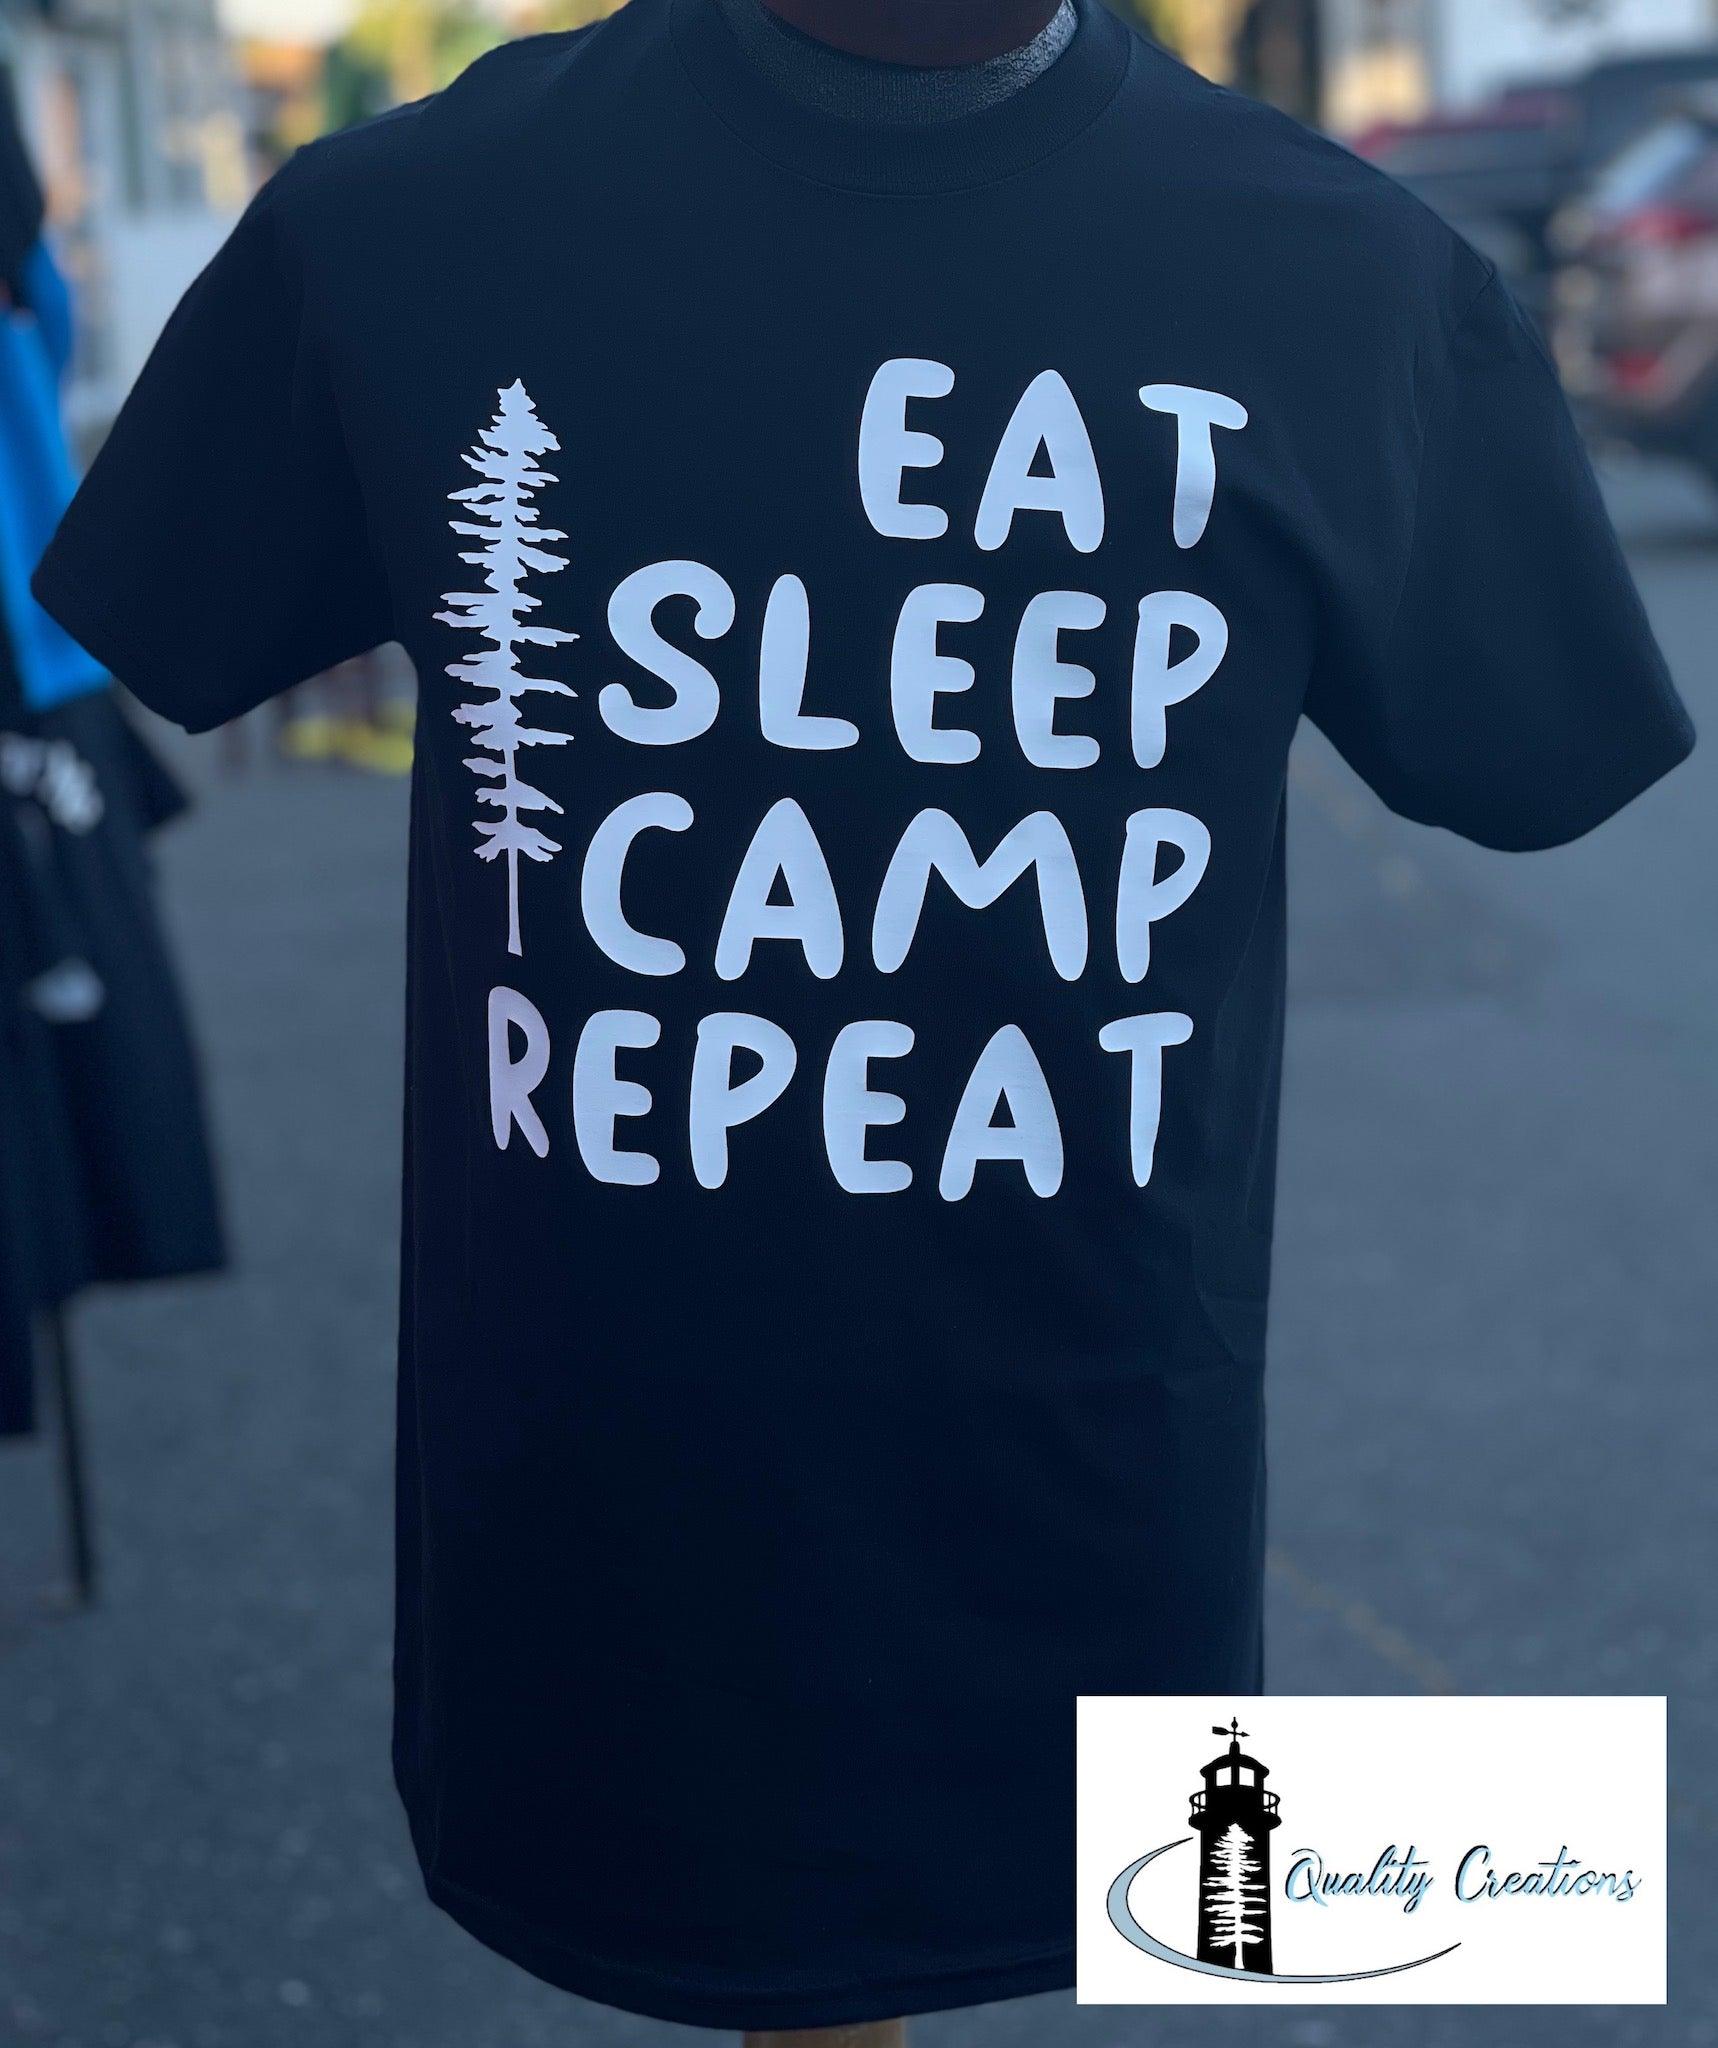 Eat, Sleep, Bike, Repeat (Available in Bike, Camp and Hike) 100 % Cotton Shirt - Quality Creations